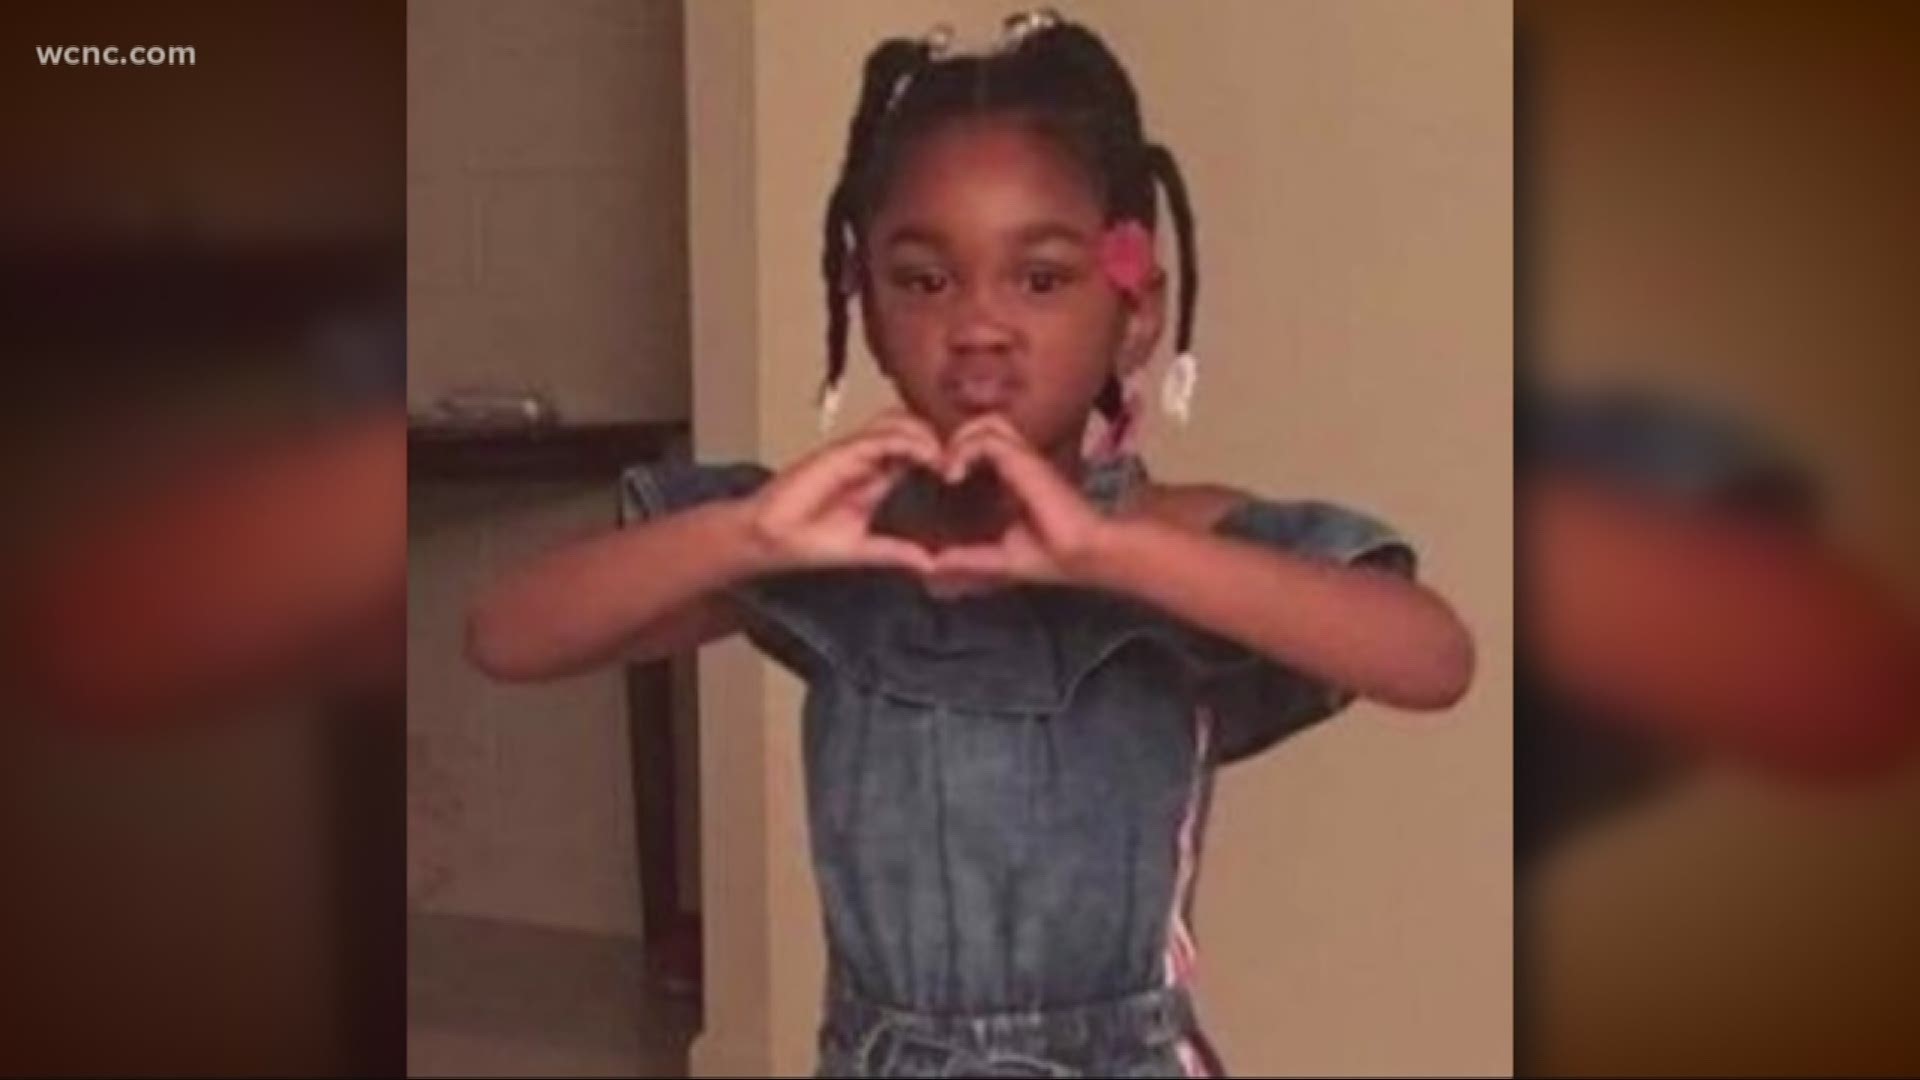 Investigators say a man confessed to killing both a mother and her 5-year-old daughter, and dumped the 5-year-old's body inside a dumpster. Now, there's an exhaustive search to find her body in two county landfills.